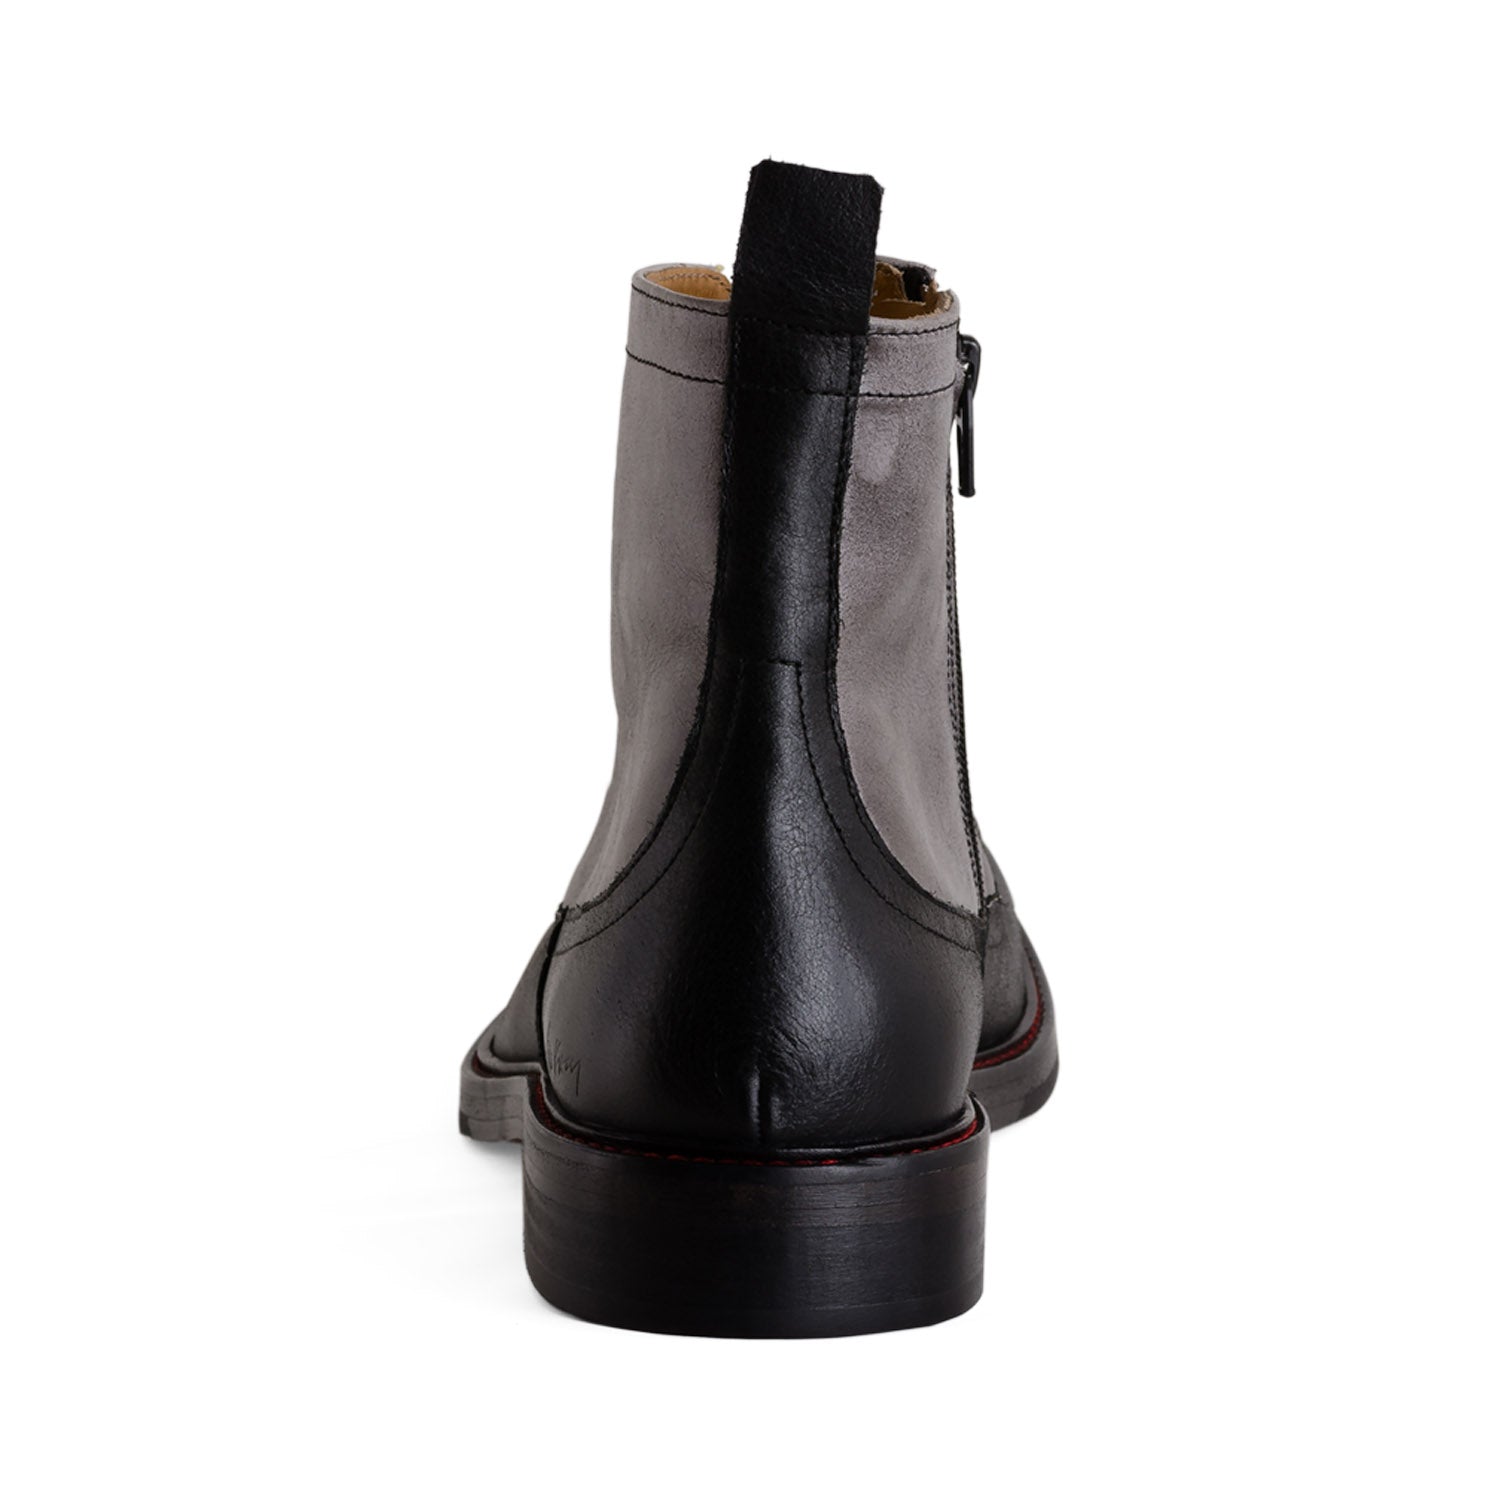 The Limited-Edition Dress Boot (3 color options) - NiK Kacy